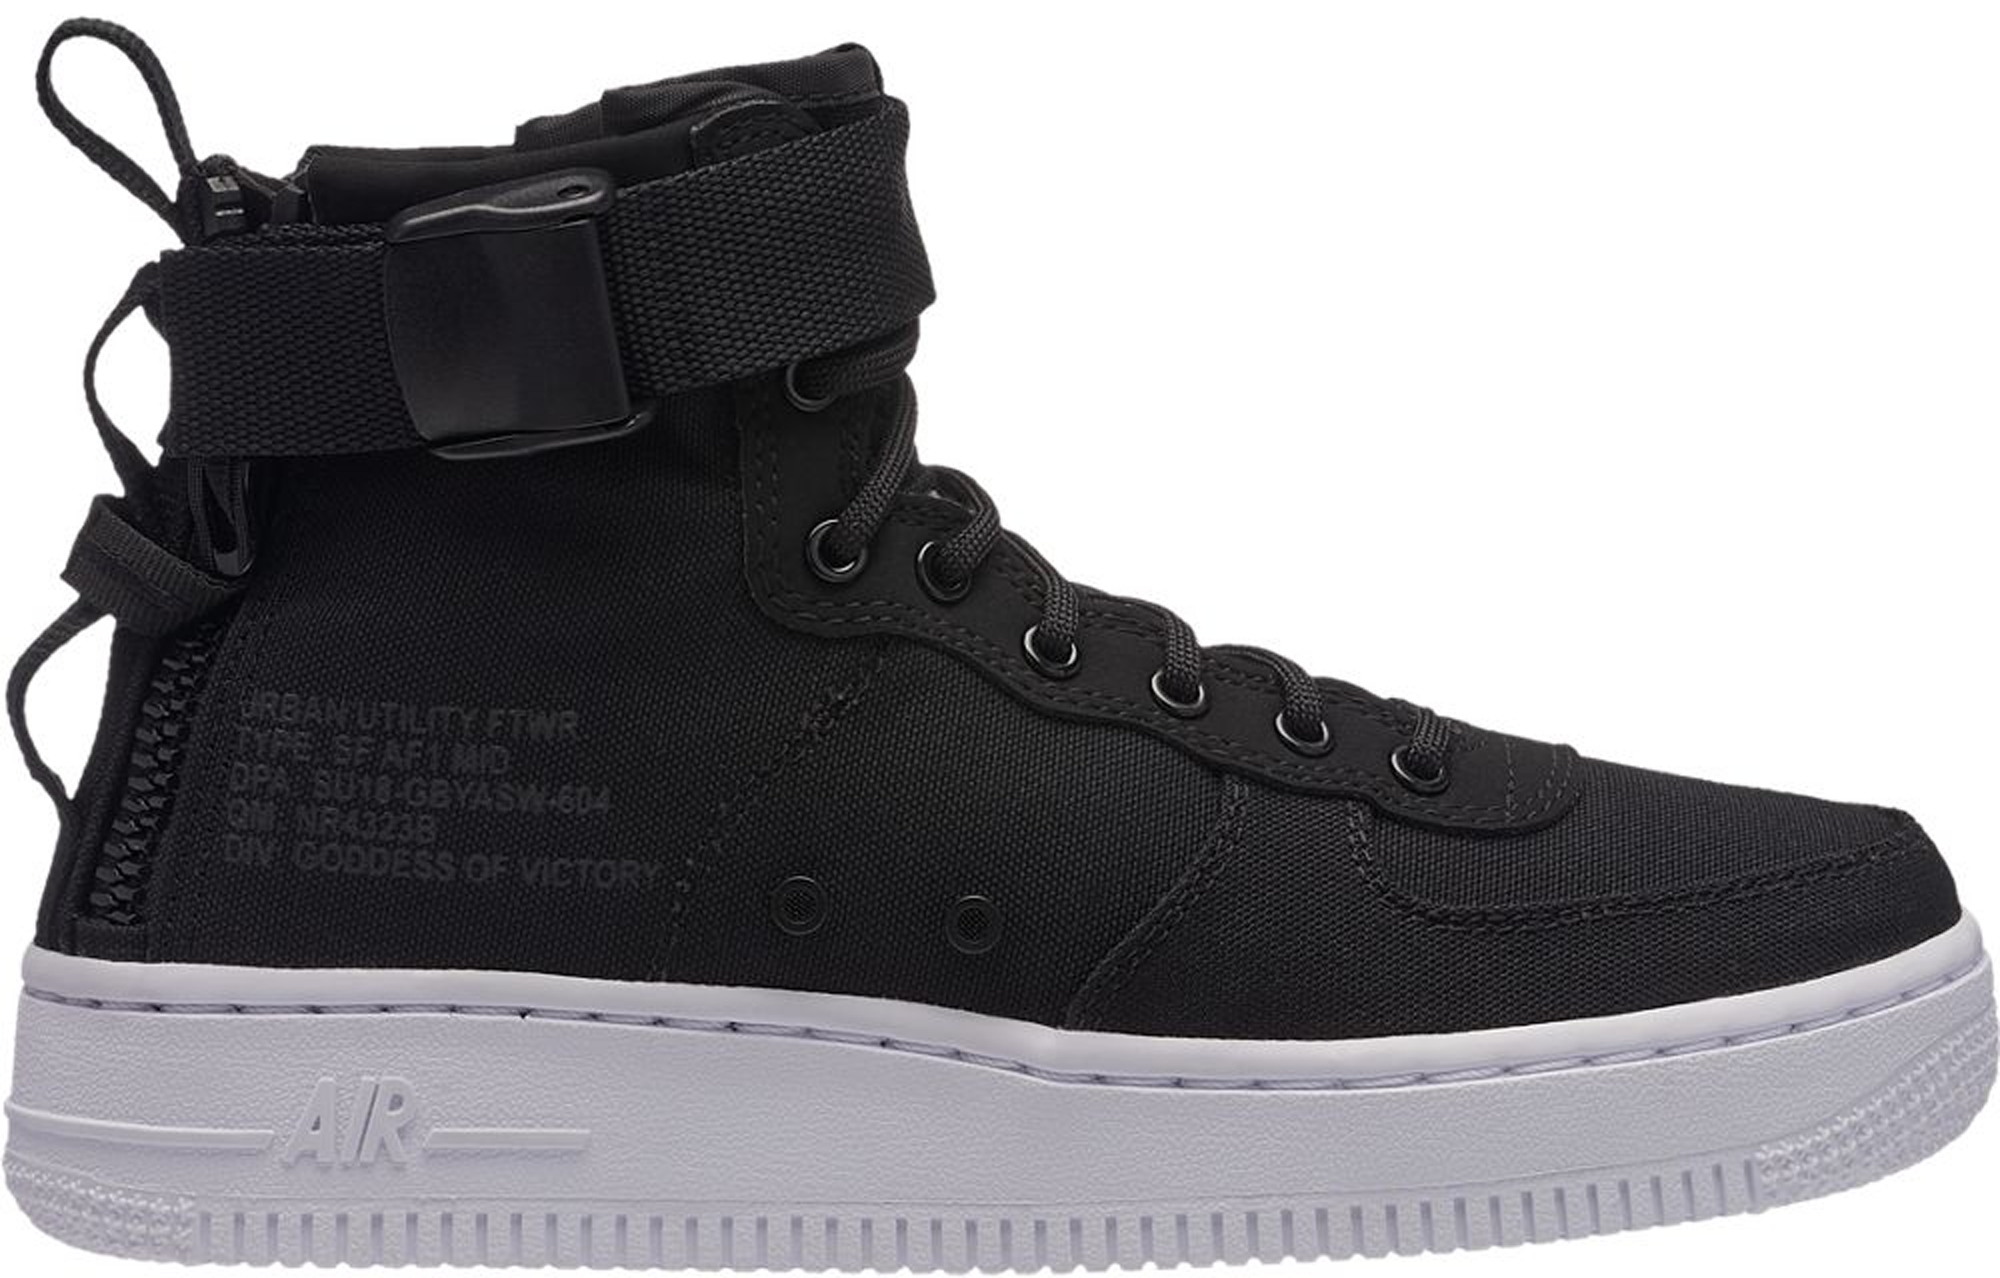 Nike SF Air Force 1 Mid Black Anthracite White (GS)